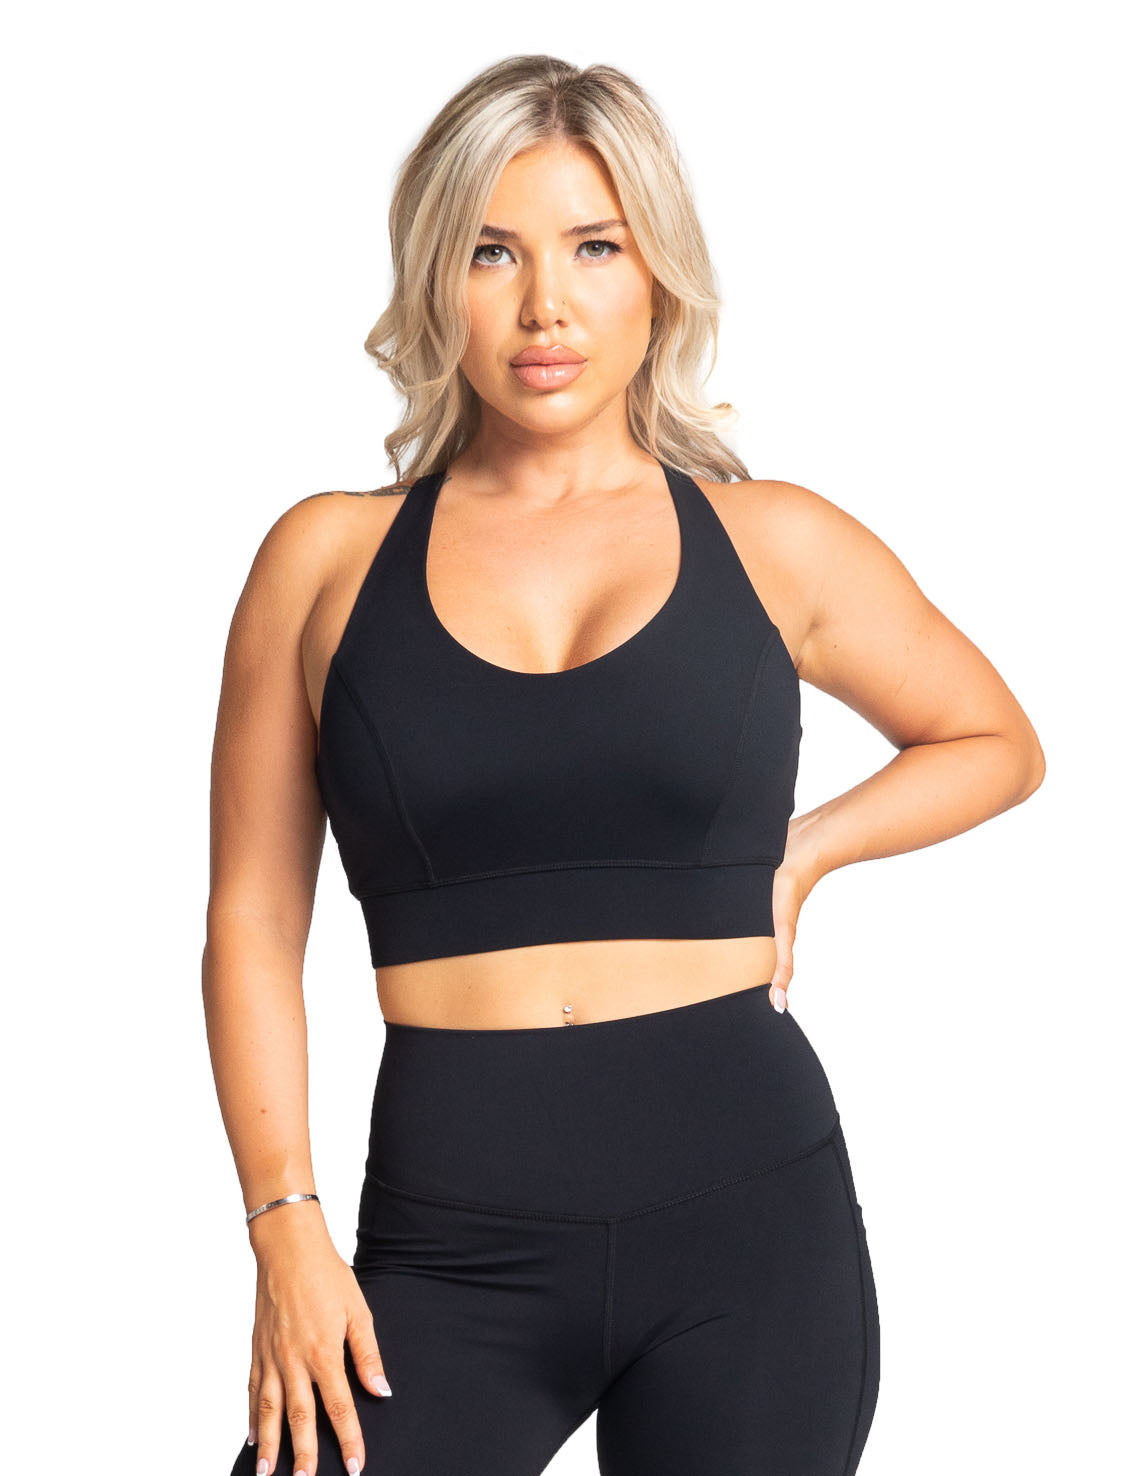 TWIN BIRDS Stretch Women Sports Bra - Buy Carbon Black TWIN BIRDS Stretch  Women Sports Bra Online at Best Prices in India